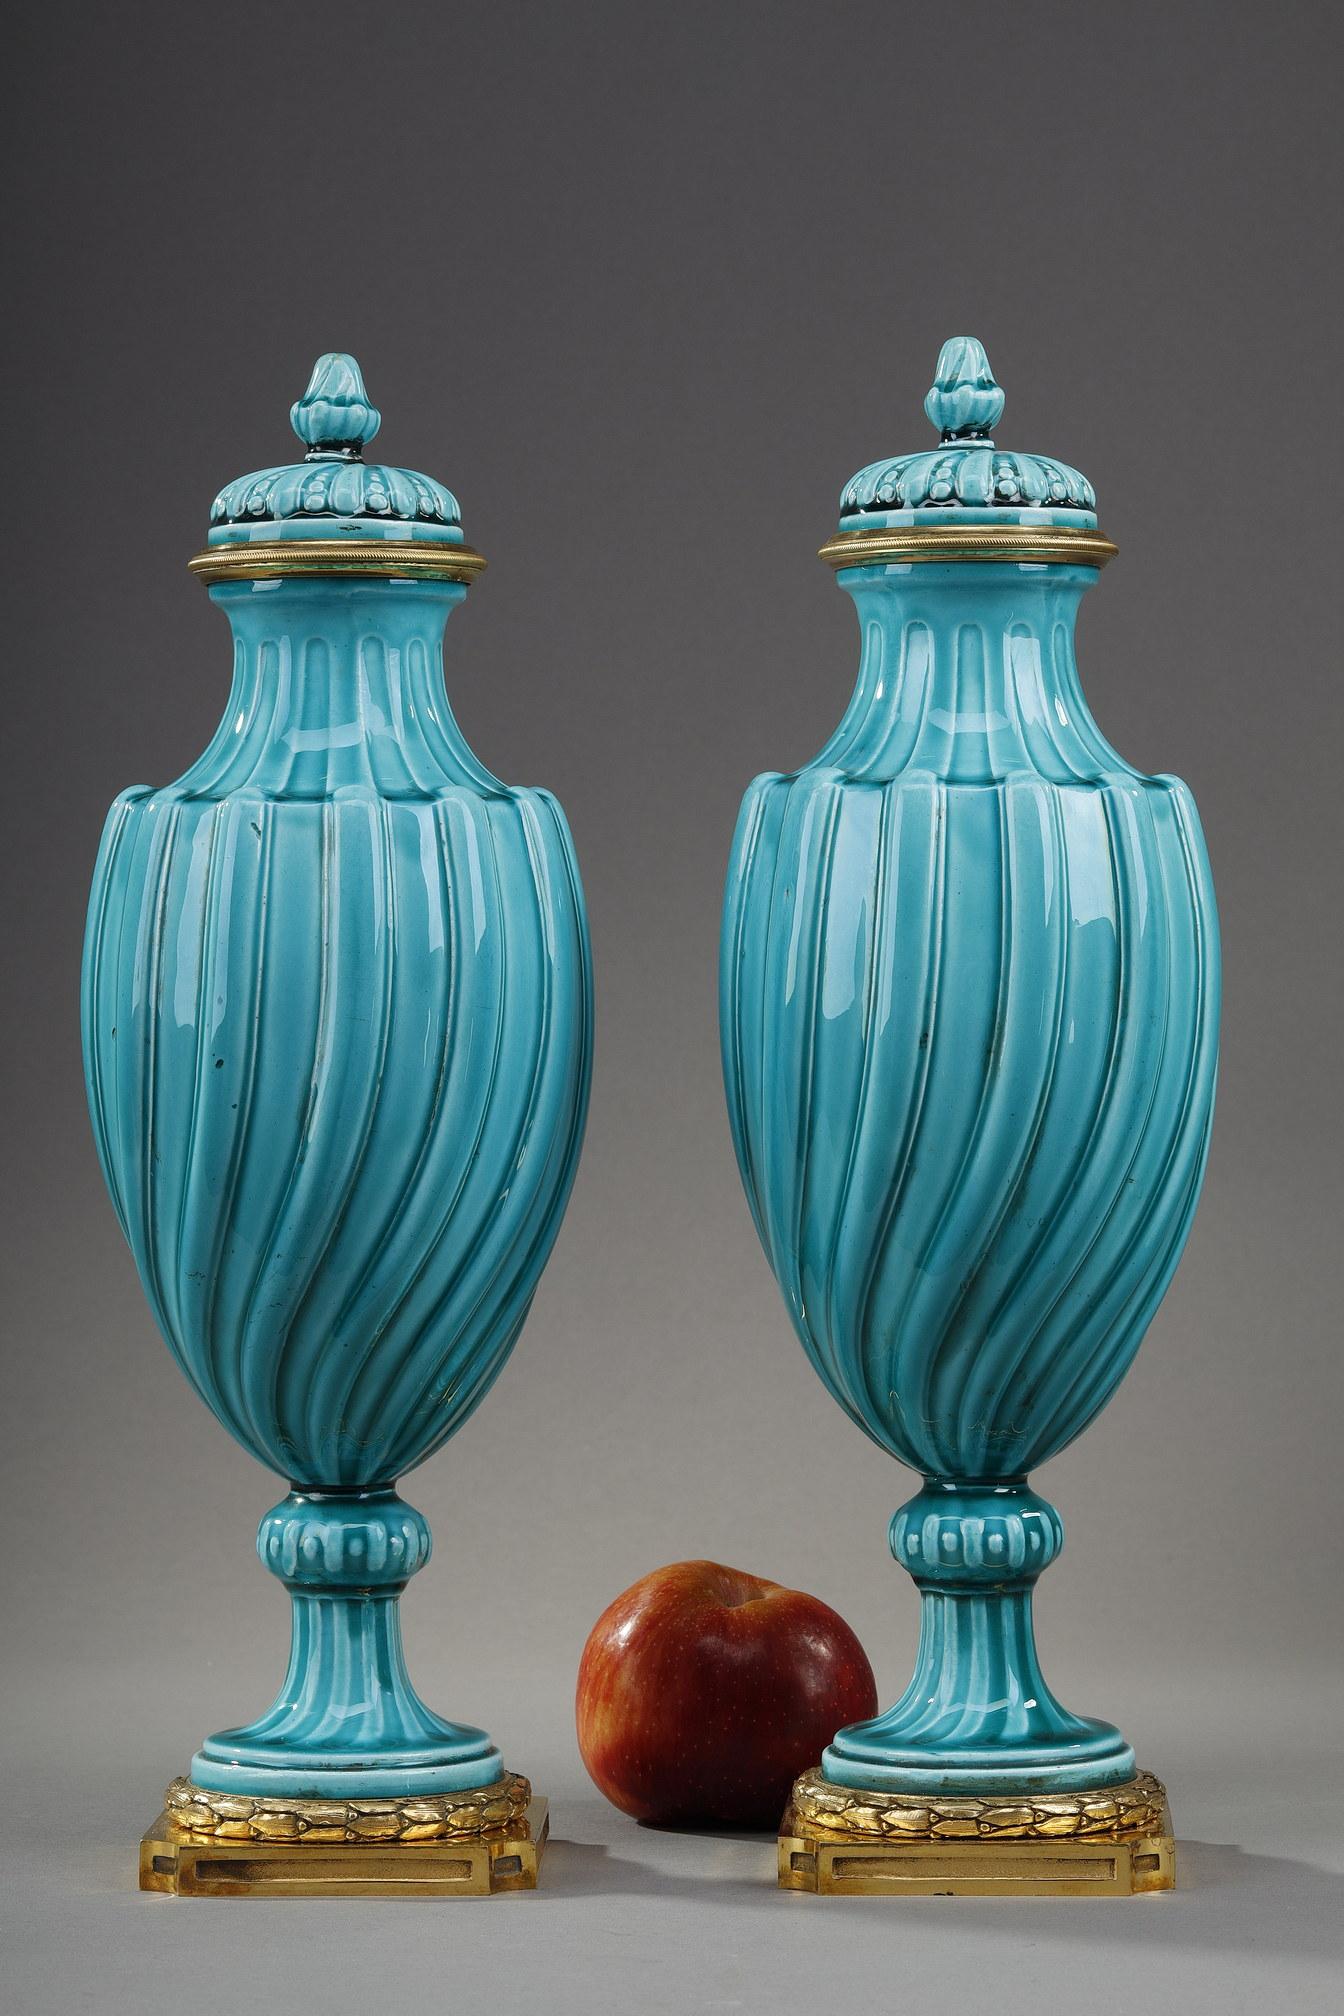 Pair of turquoise blue ceramic covered vases in the Louis XVI style with twisted decoration. They have a gilded bronze mount. It takes the shape of a laurel wreath on the foot. The removable lid is twisted and toped by a handle. 

It is a